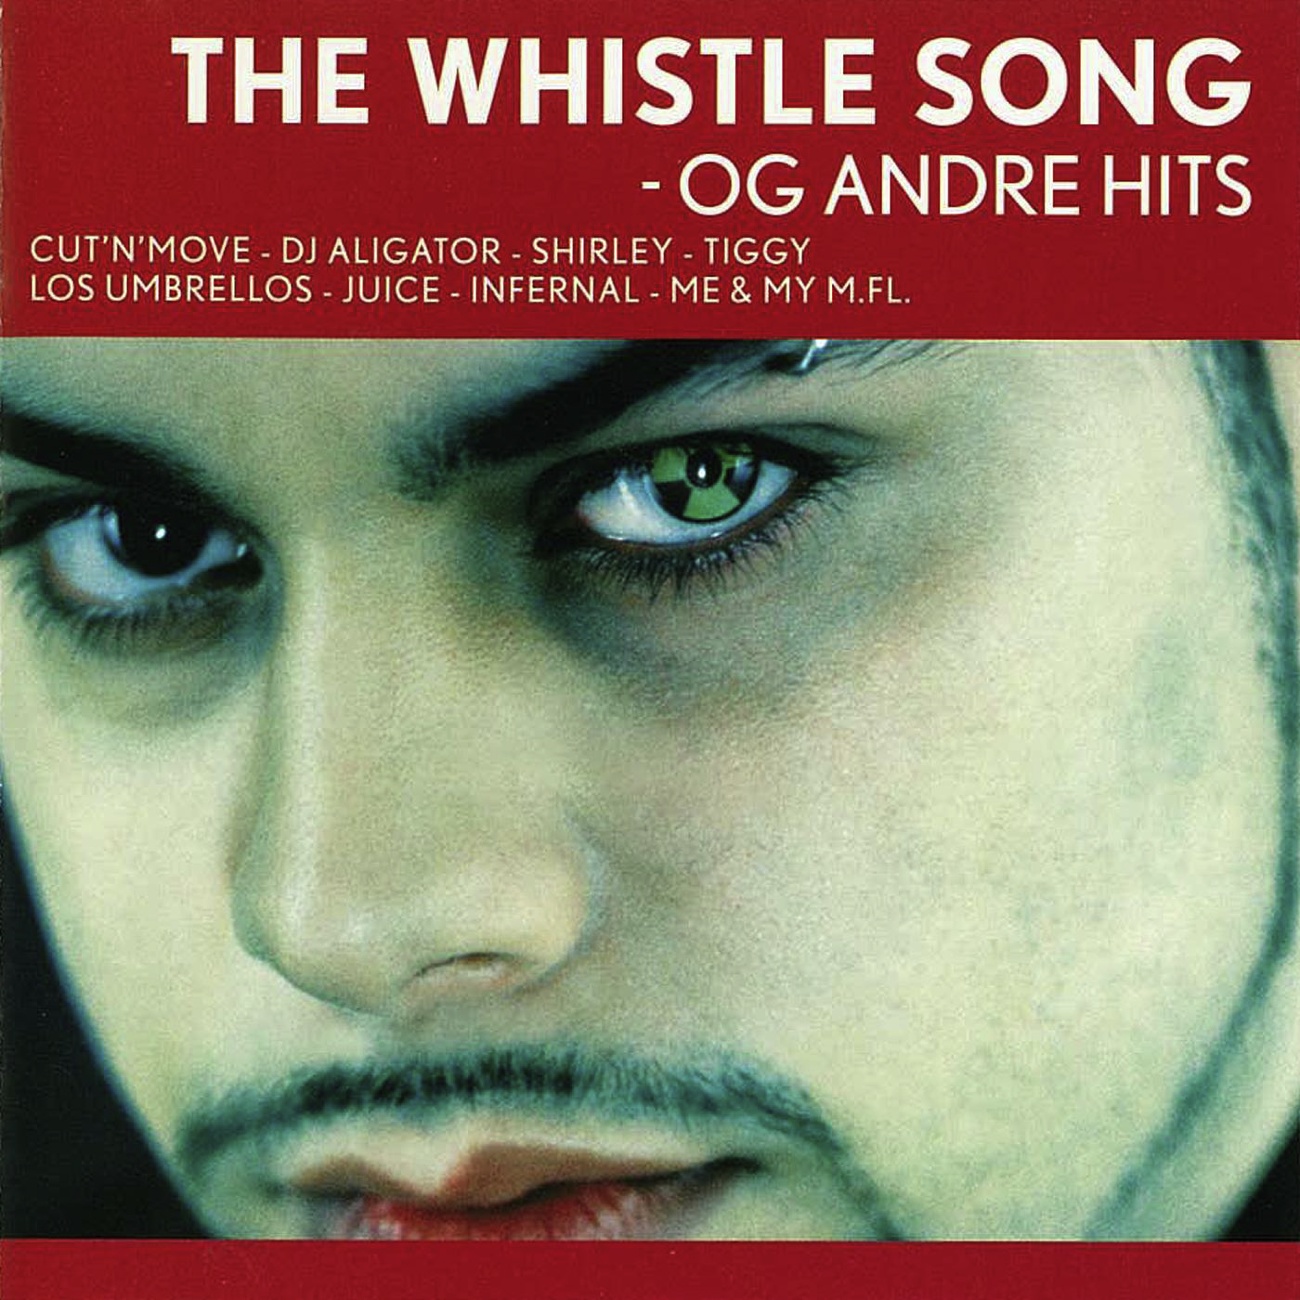 The Whistle Song -Og Andre Hits